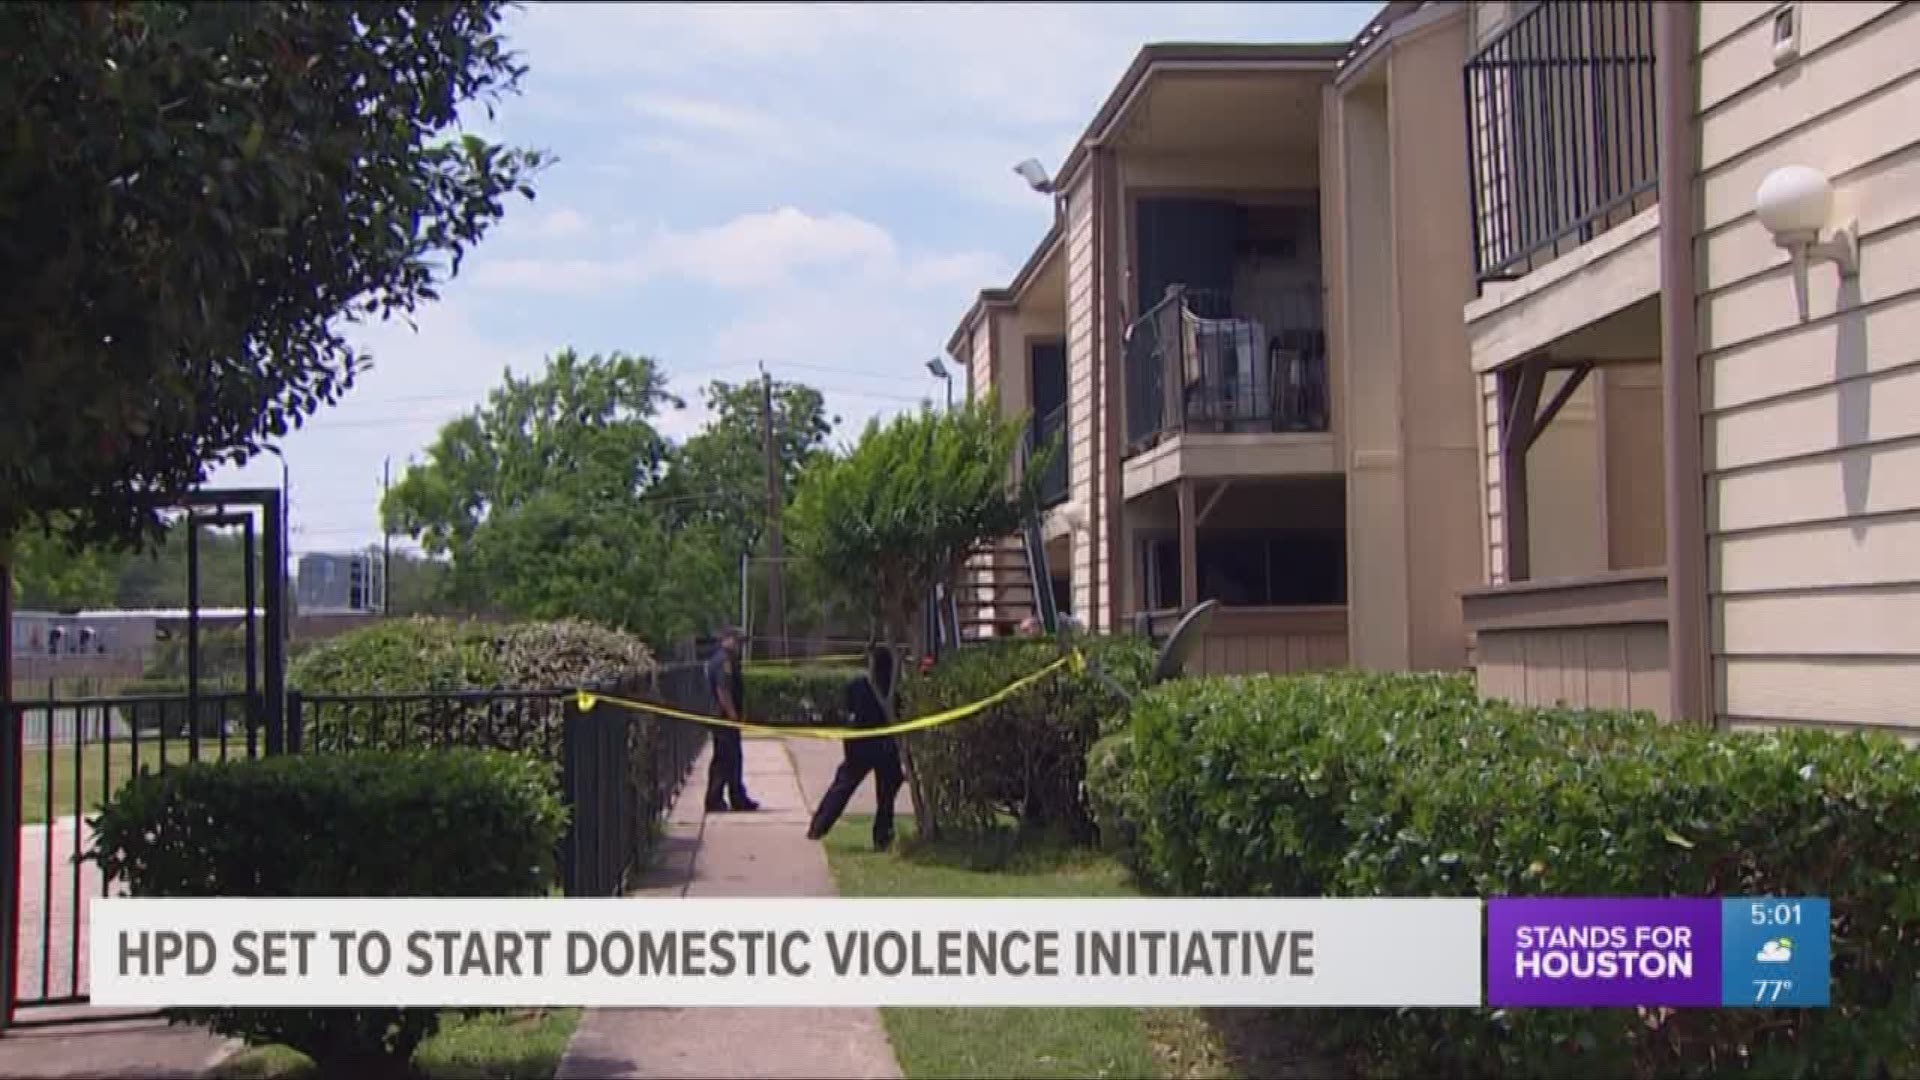 After the second deadly domestic violence incident in a week, Houston Police are mapping out a new initiative to help fix what they're now calling an 'epidemic.'